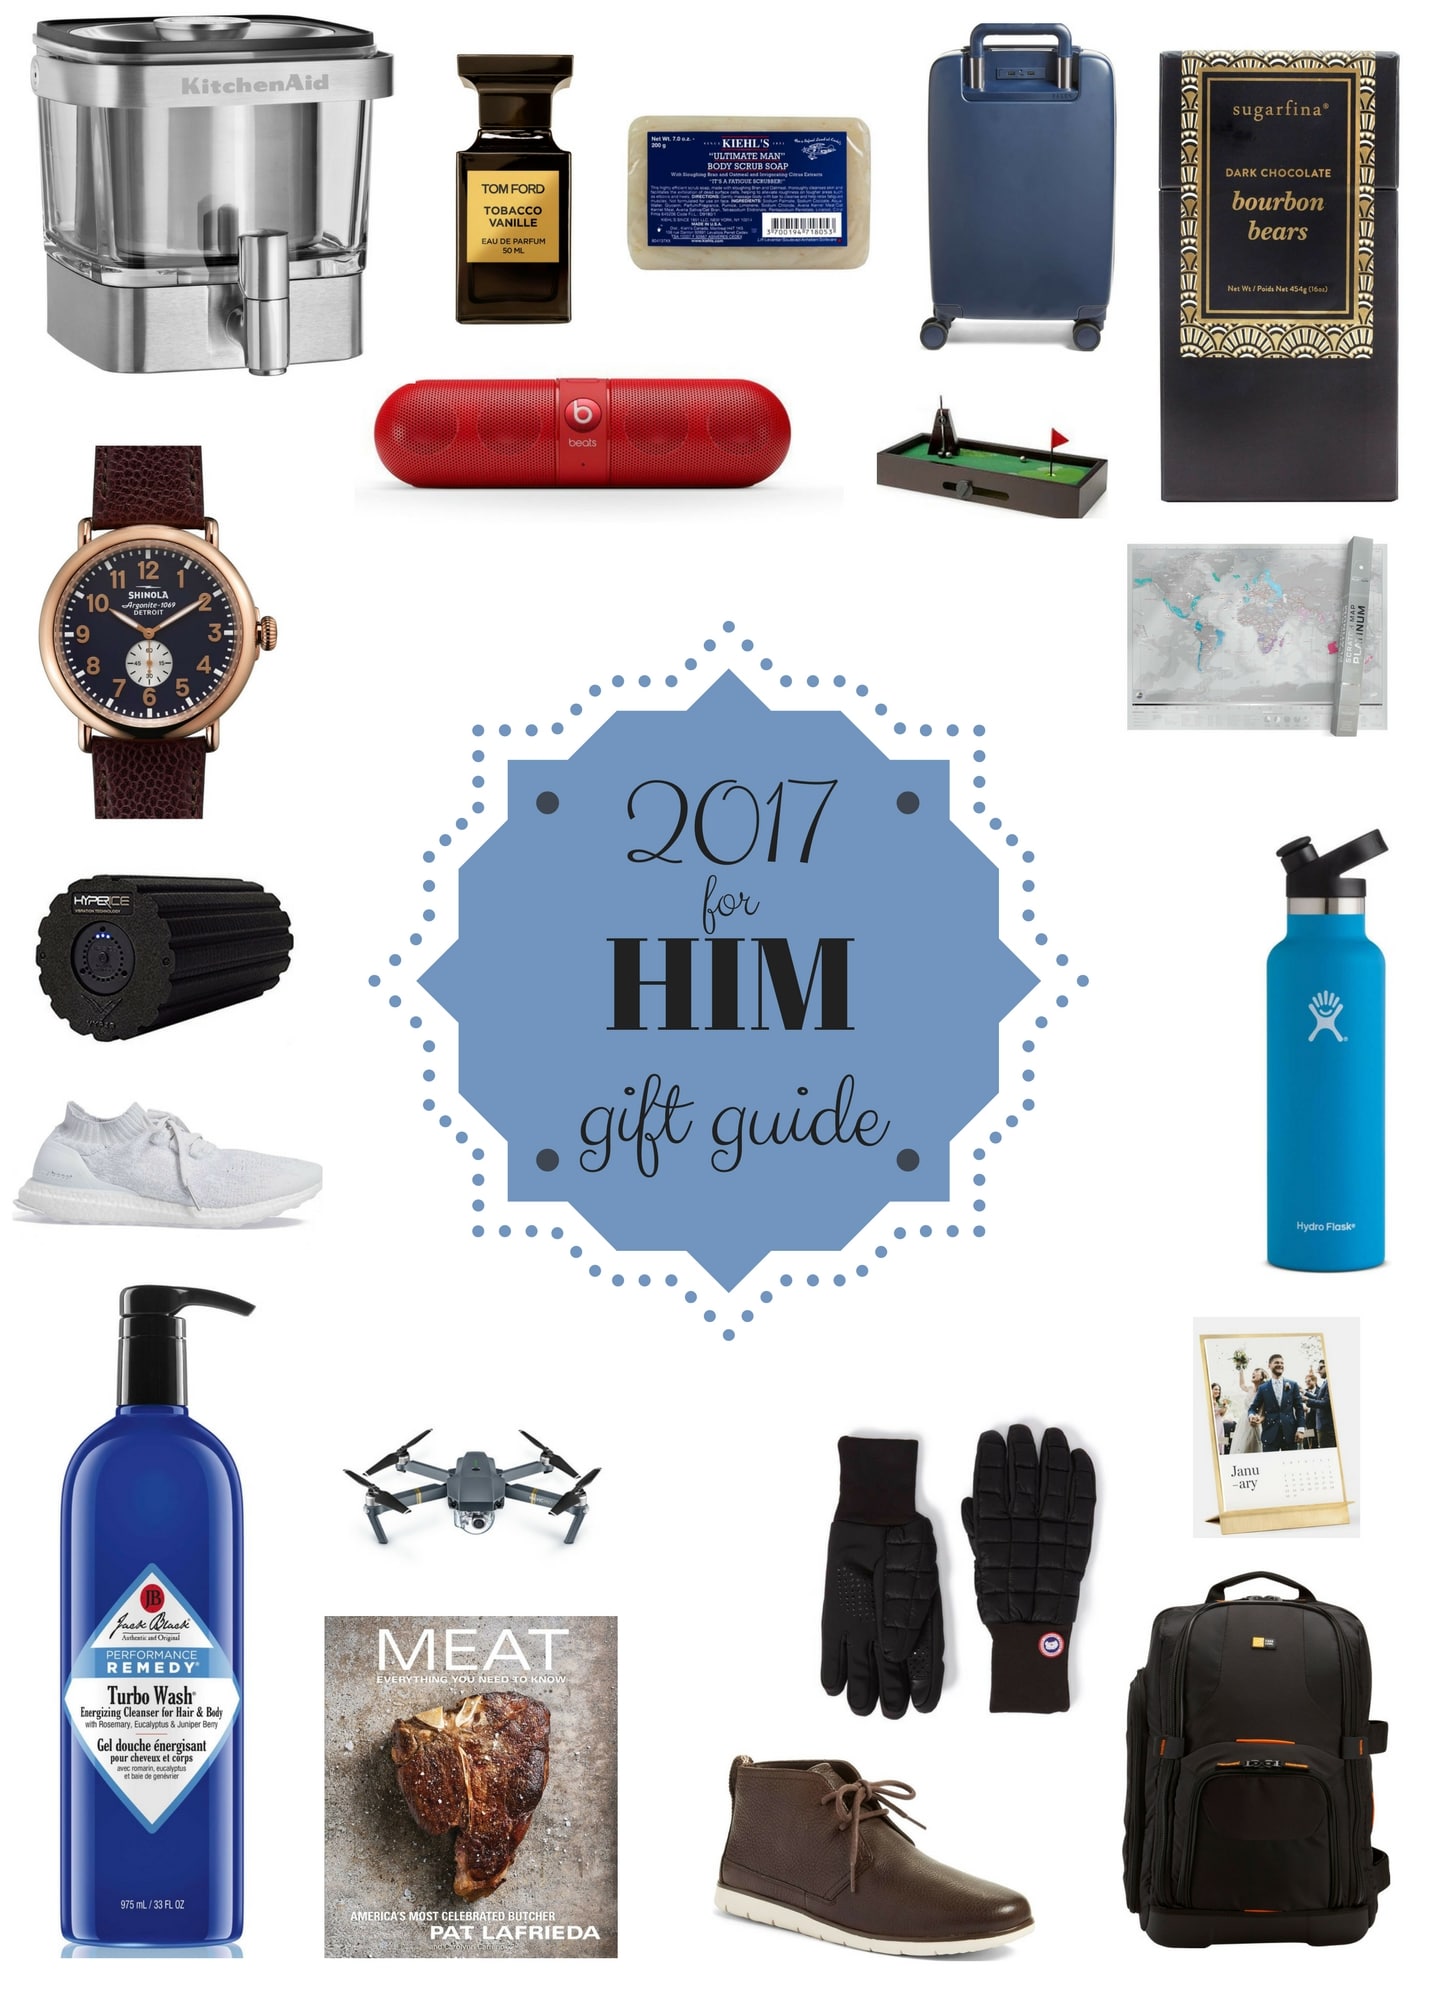 Holiday Gift Guide - 2017 Holiday Gift Guides for Everyone
